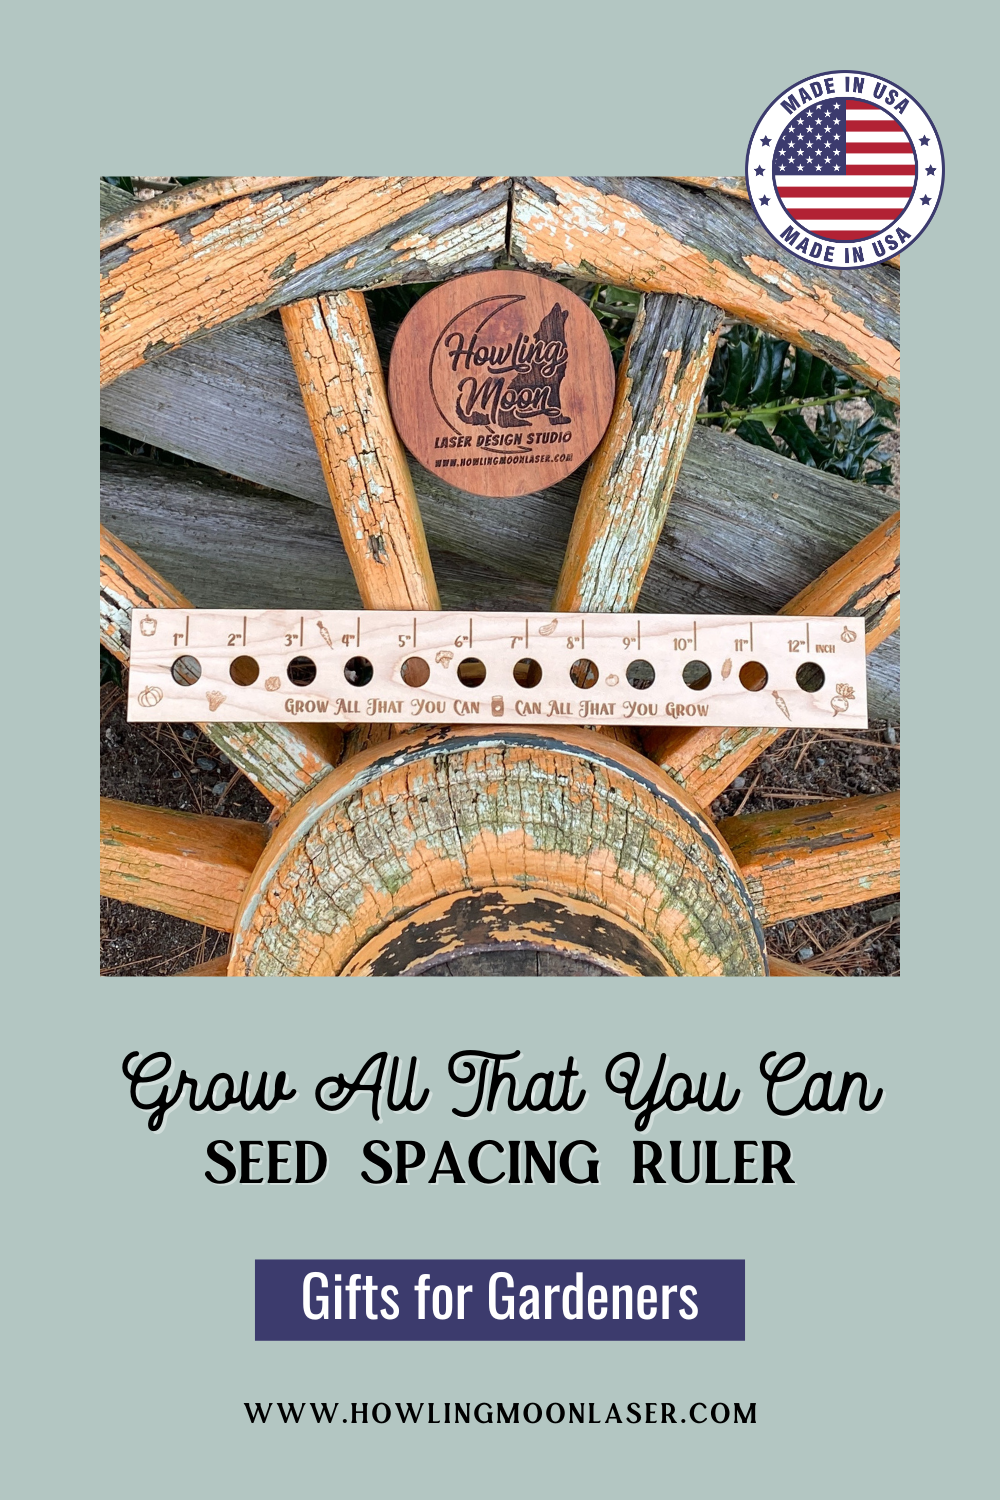 Grow All That You Can - Can All That You Grow seed spacing ruler from Howling Moon Laser Design Studio Virginia USA